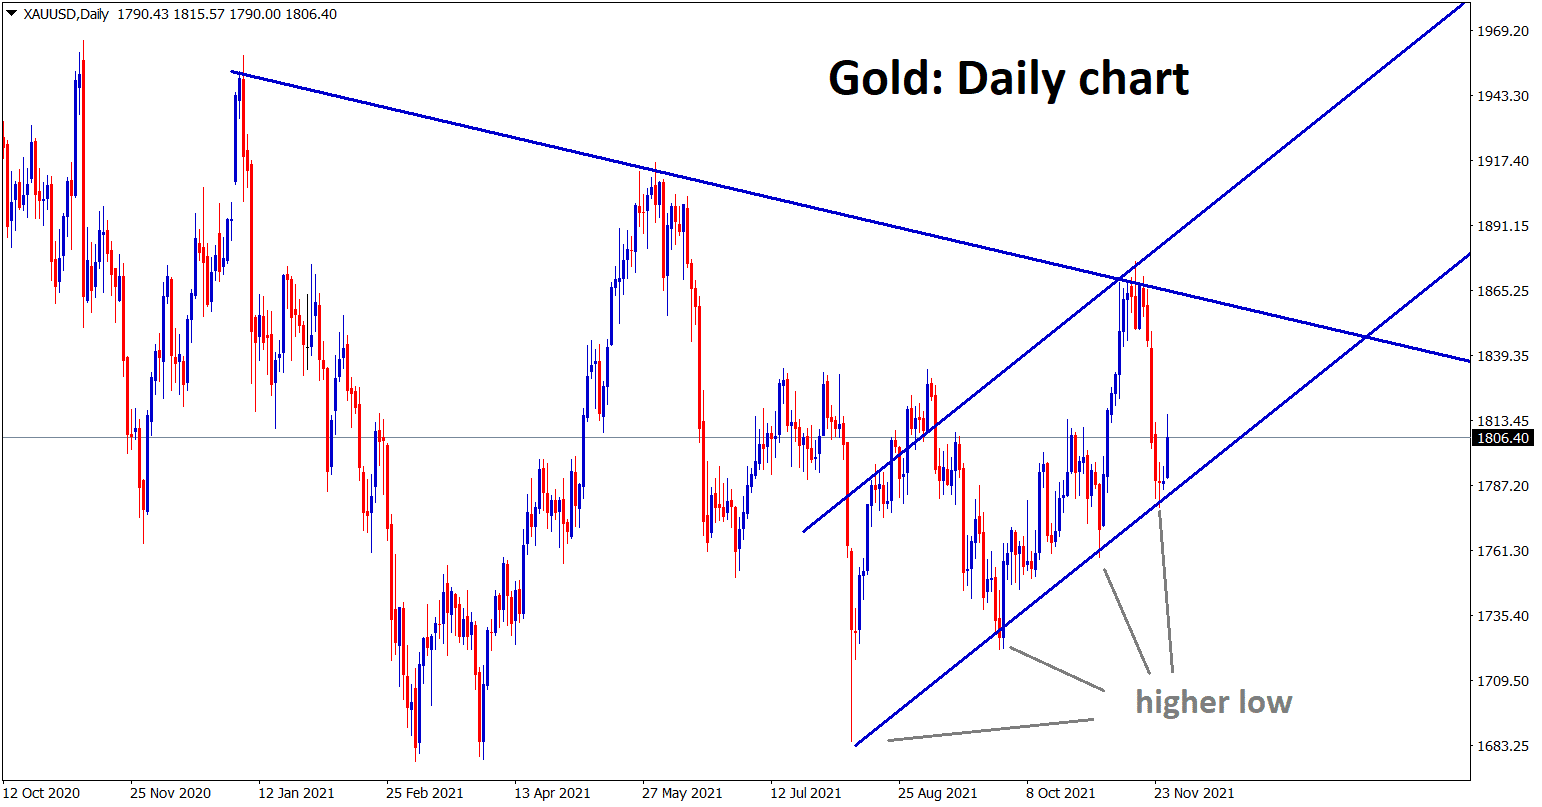 Gold is making a correction from the higher low area of the minor ascending channel